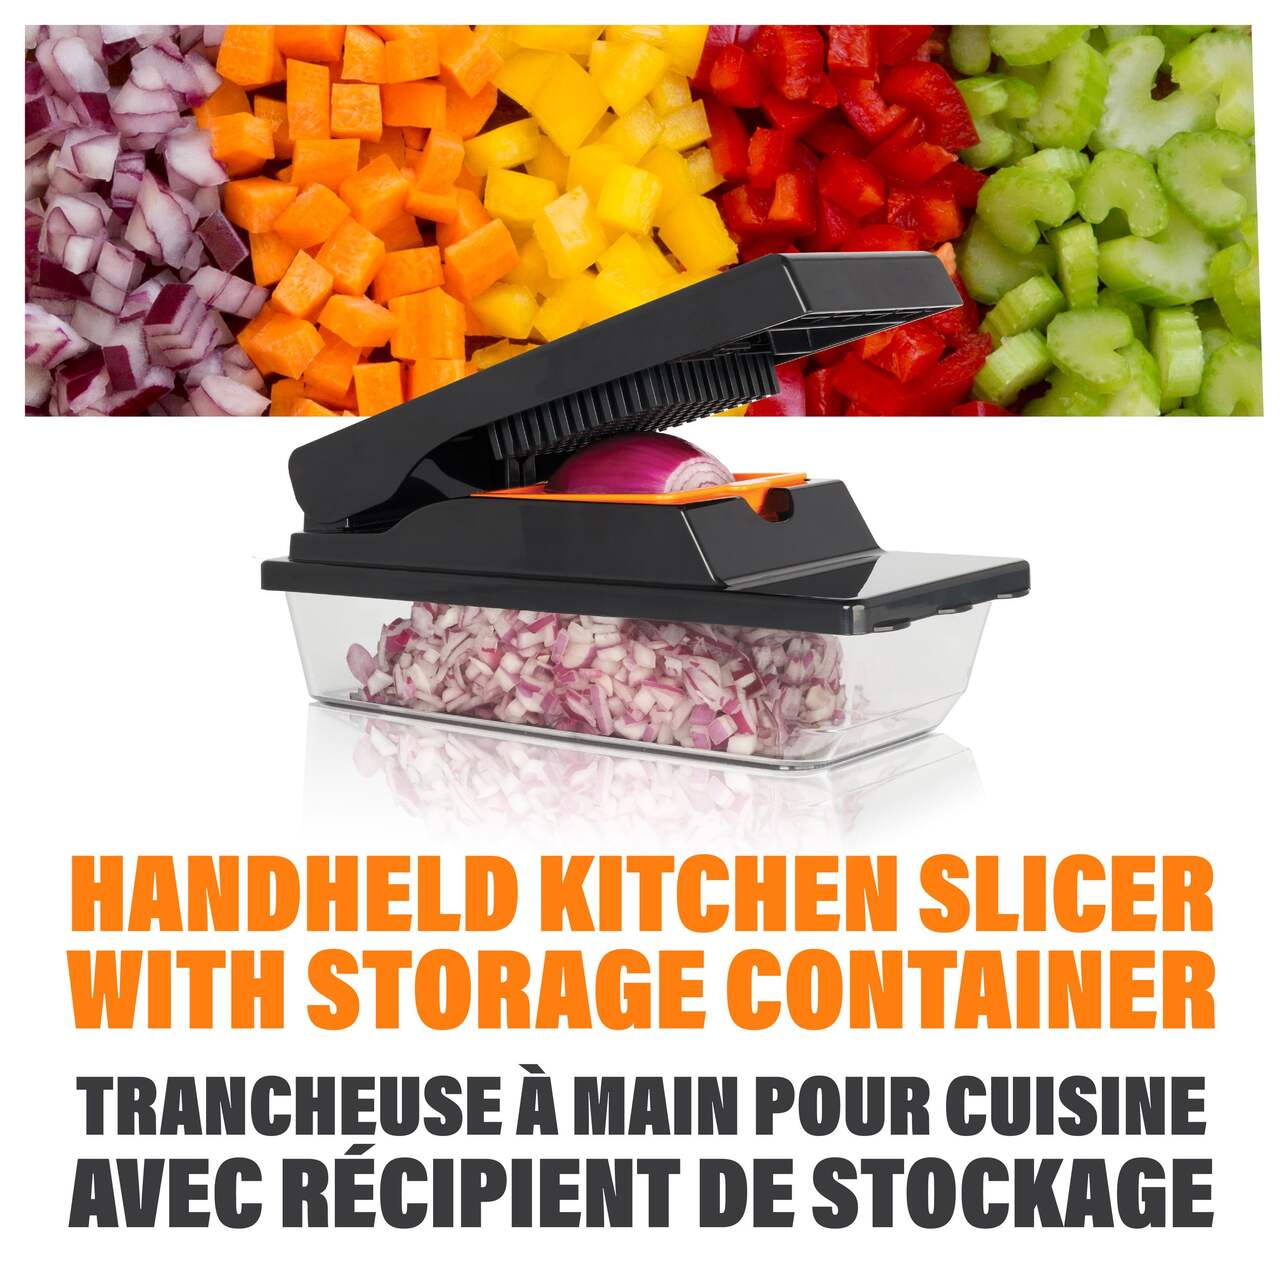 https://media-www.canadiantire.ca/product/living/as-seen-on-tv/asotv/4990053/nutri-slicer-xl-b476c280-ea19-48d7-9eae-0352d4528ab8-jpgrendition.jpg?imdensity=1&imwidth=1244&impolicy=mZoom